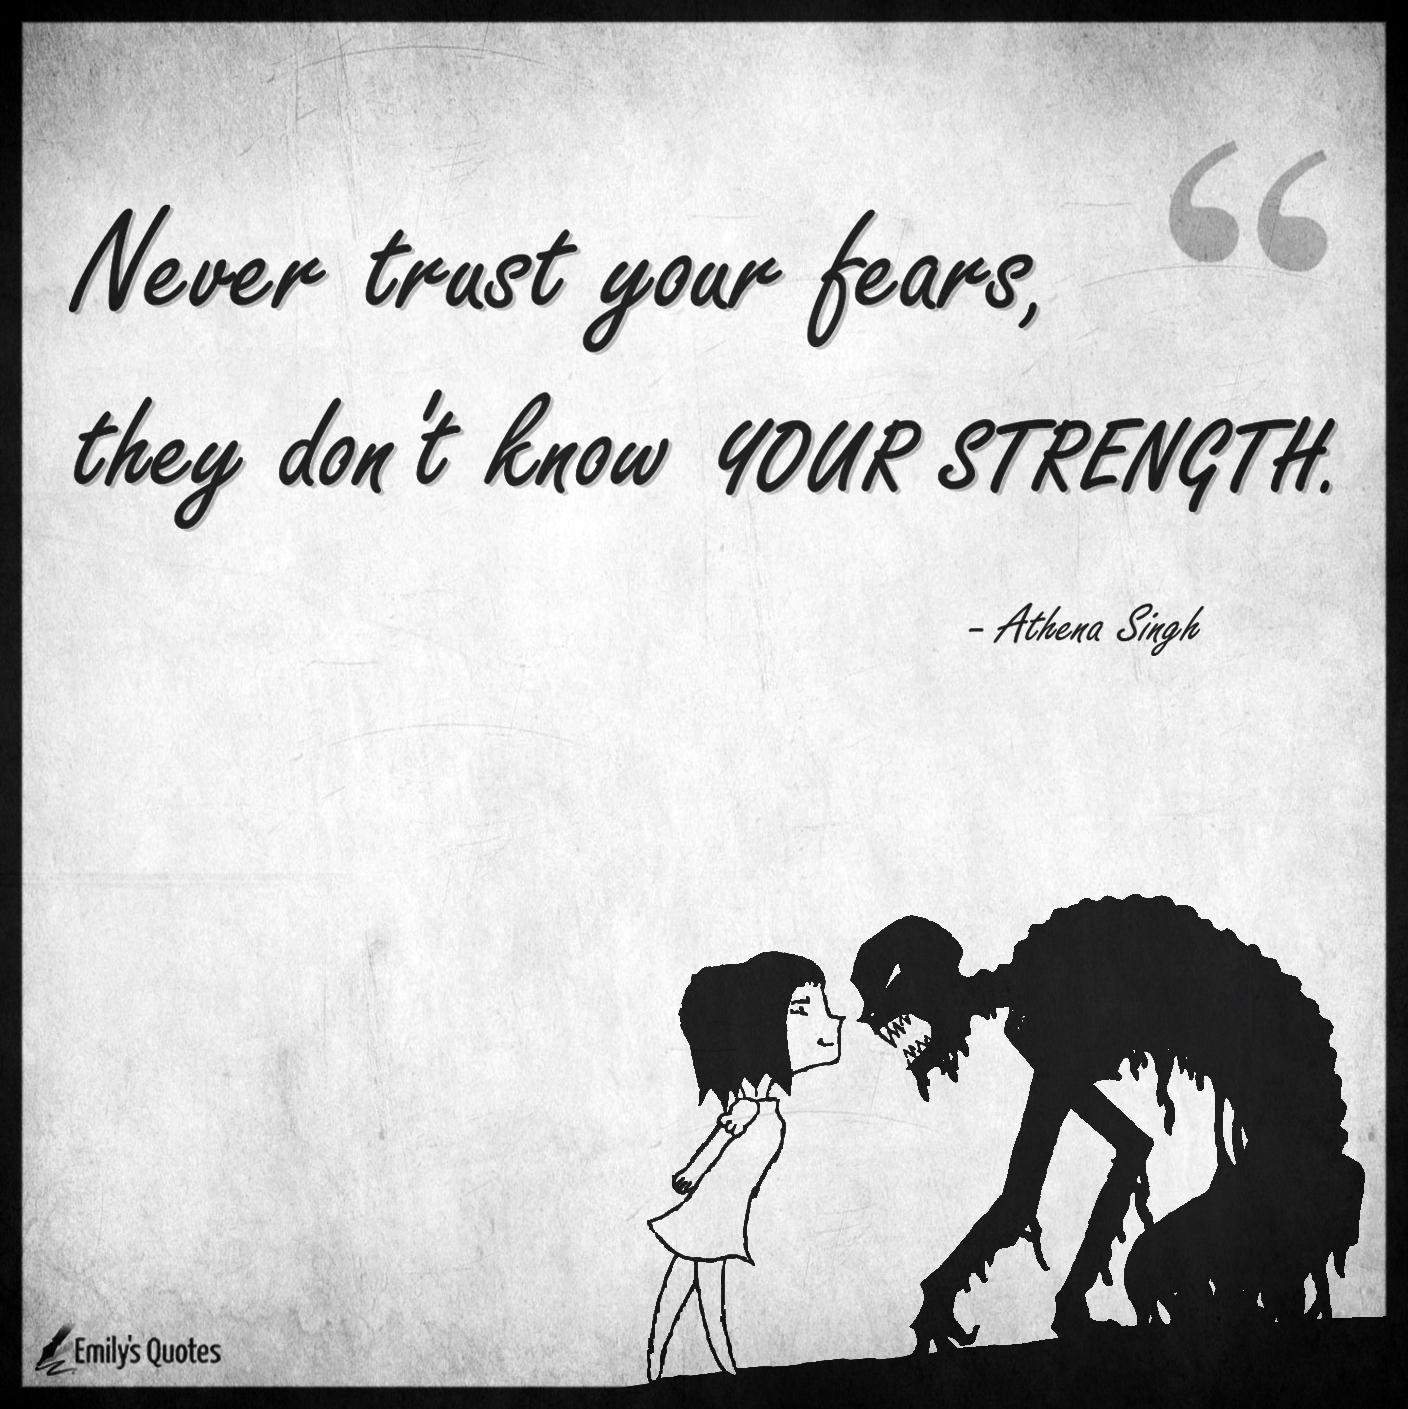 Never trust your fears, they don’t know your strength